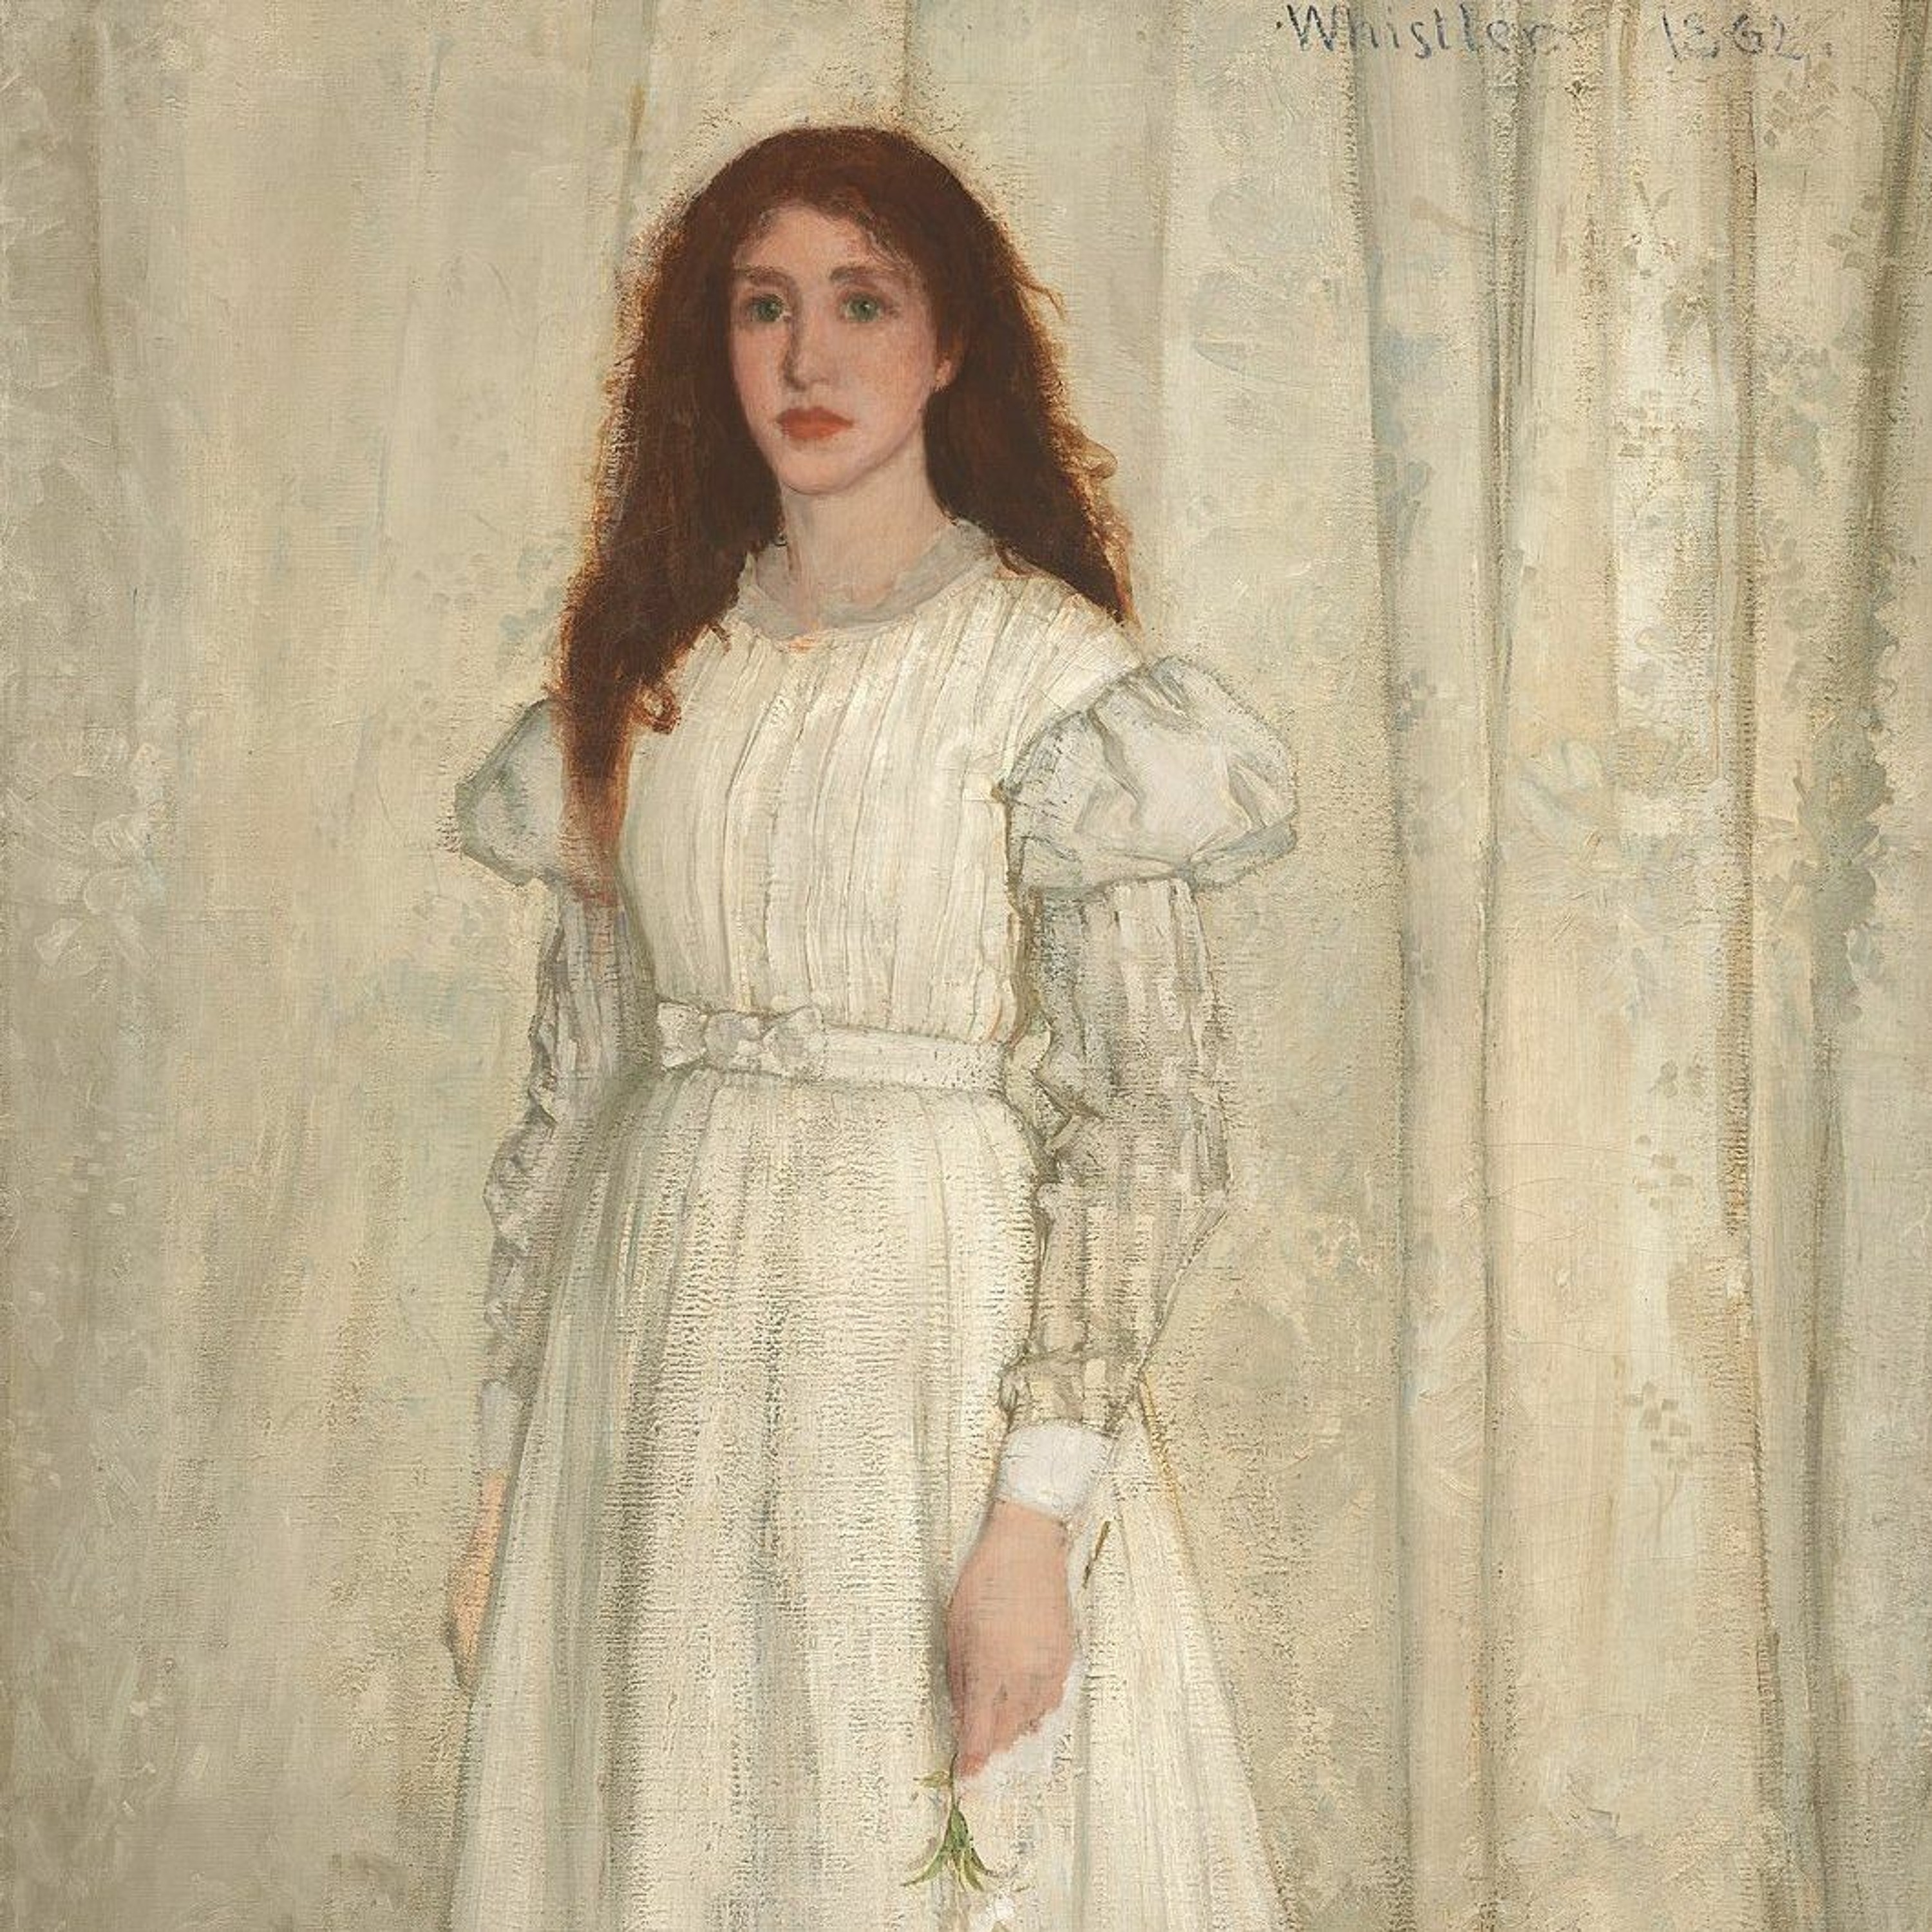 Ep. 63 - James Abbot McNeill Whistler’s ”Symphony in White No. 1: The White Girl” (1861-62)